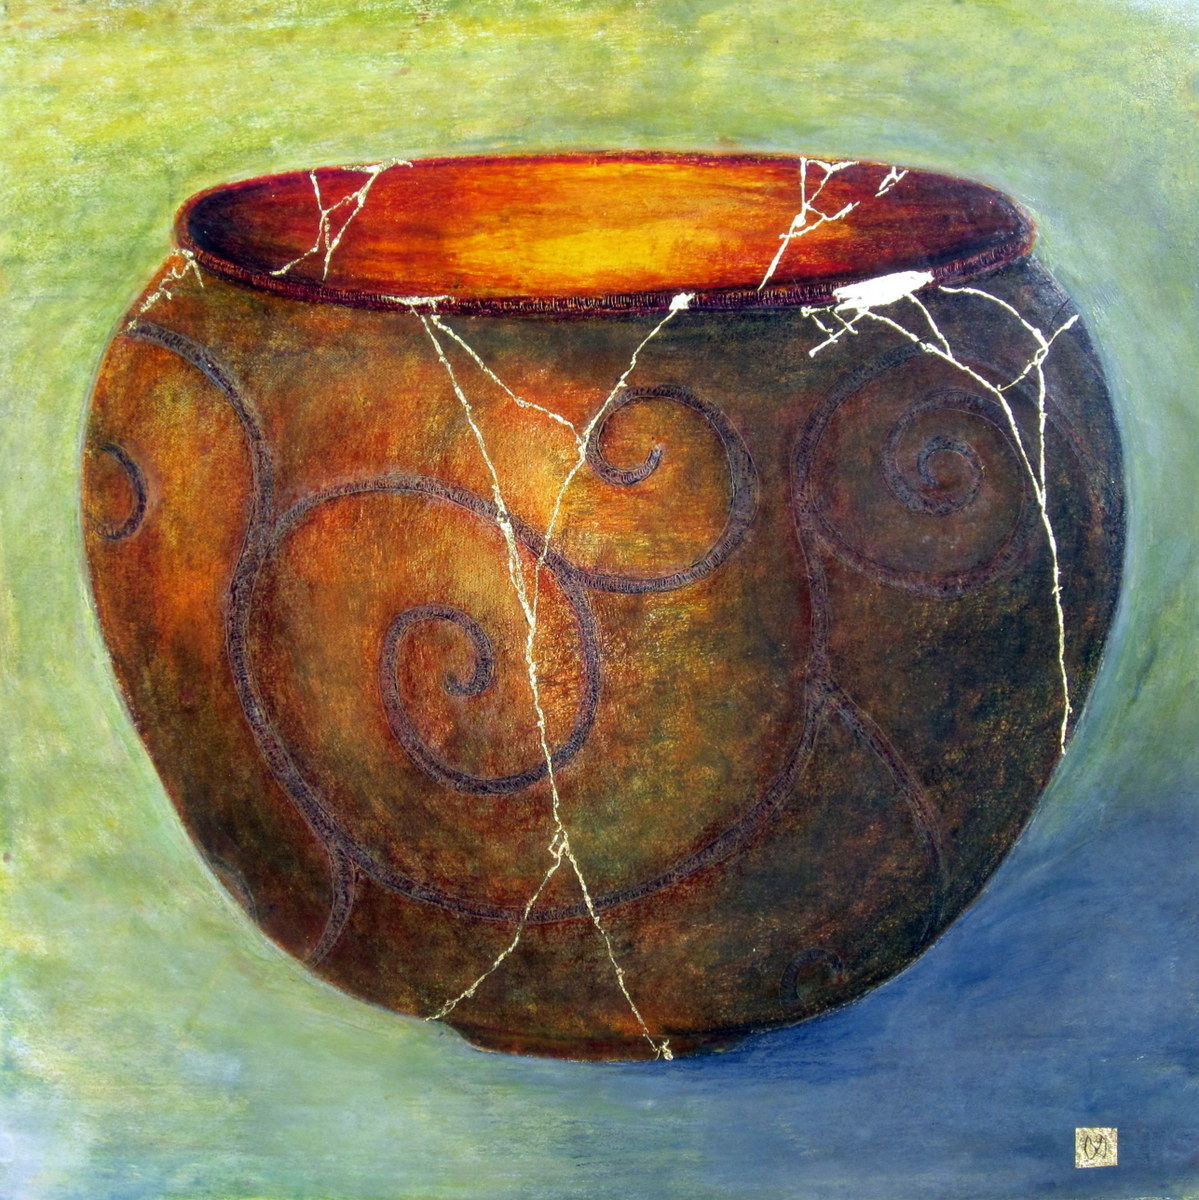 Awen - the Cauldron of Ceridwen by Mary WallaceJPG